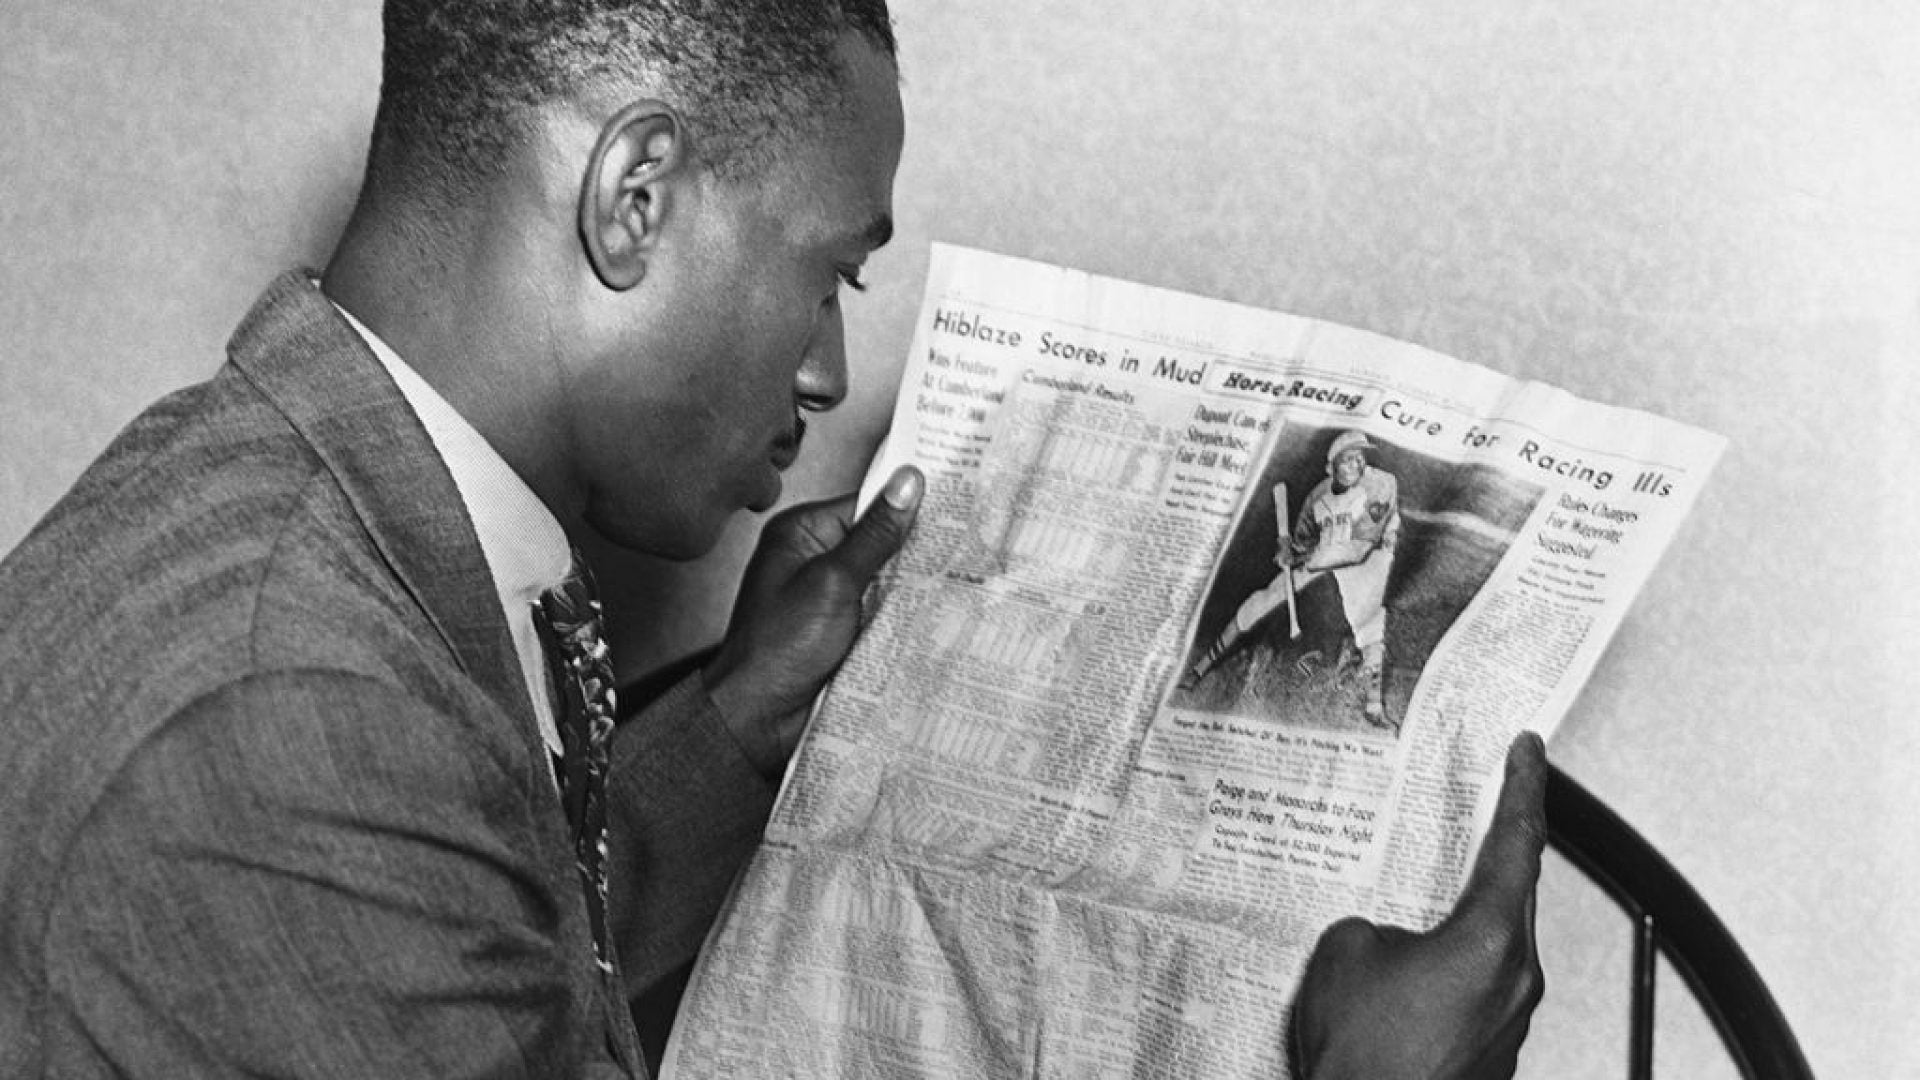 'Appalling And Biased': Missouri Paper Addresses History Of Racist Coverage